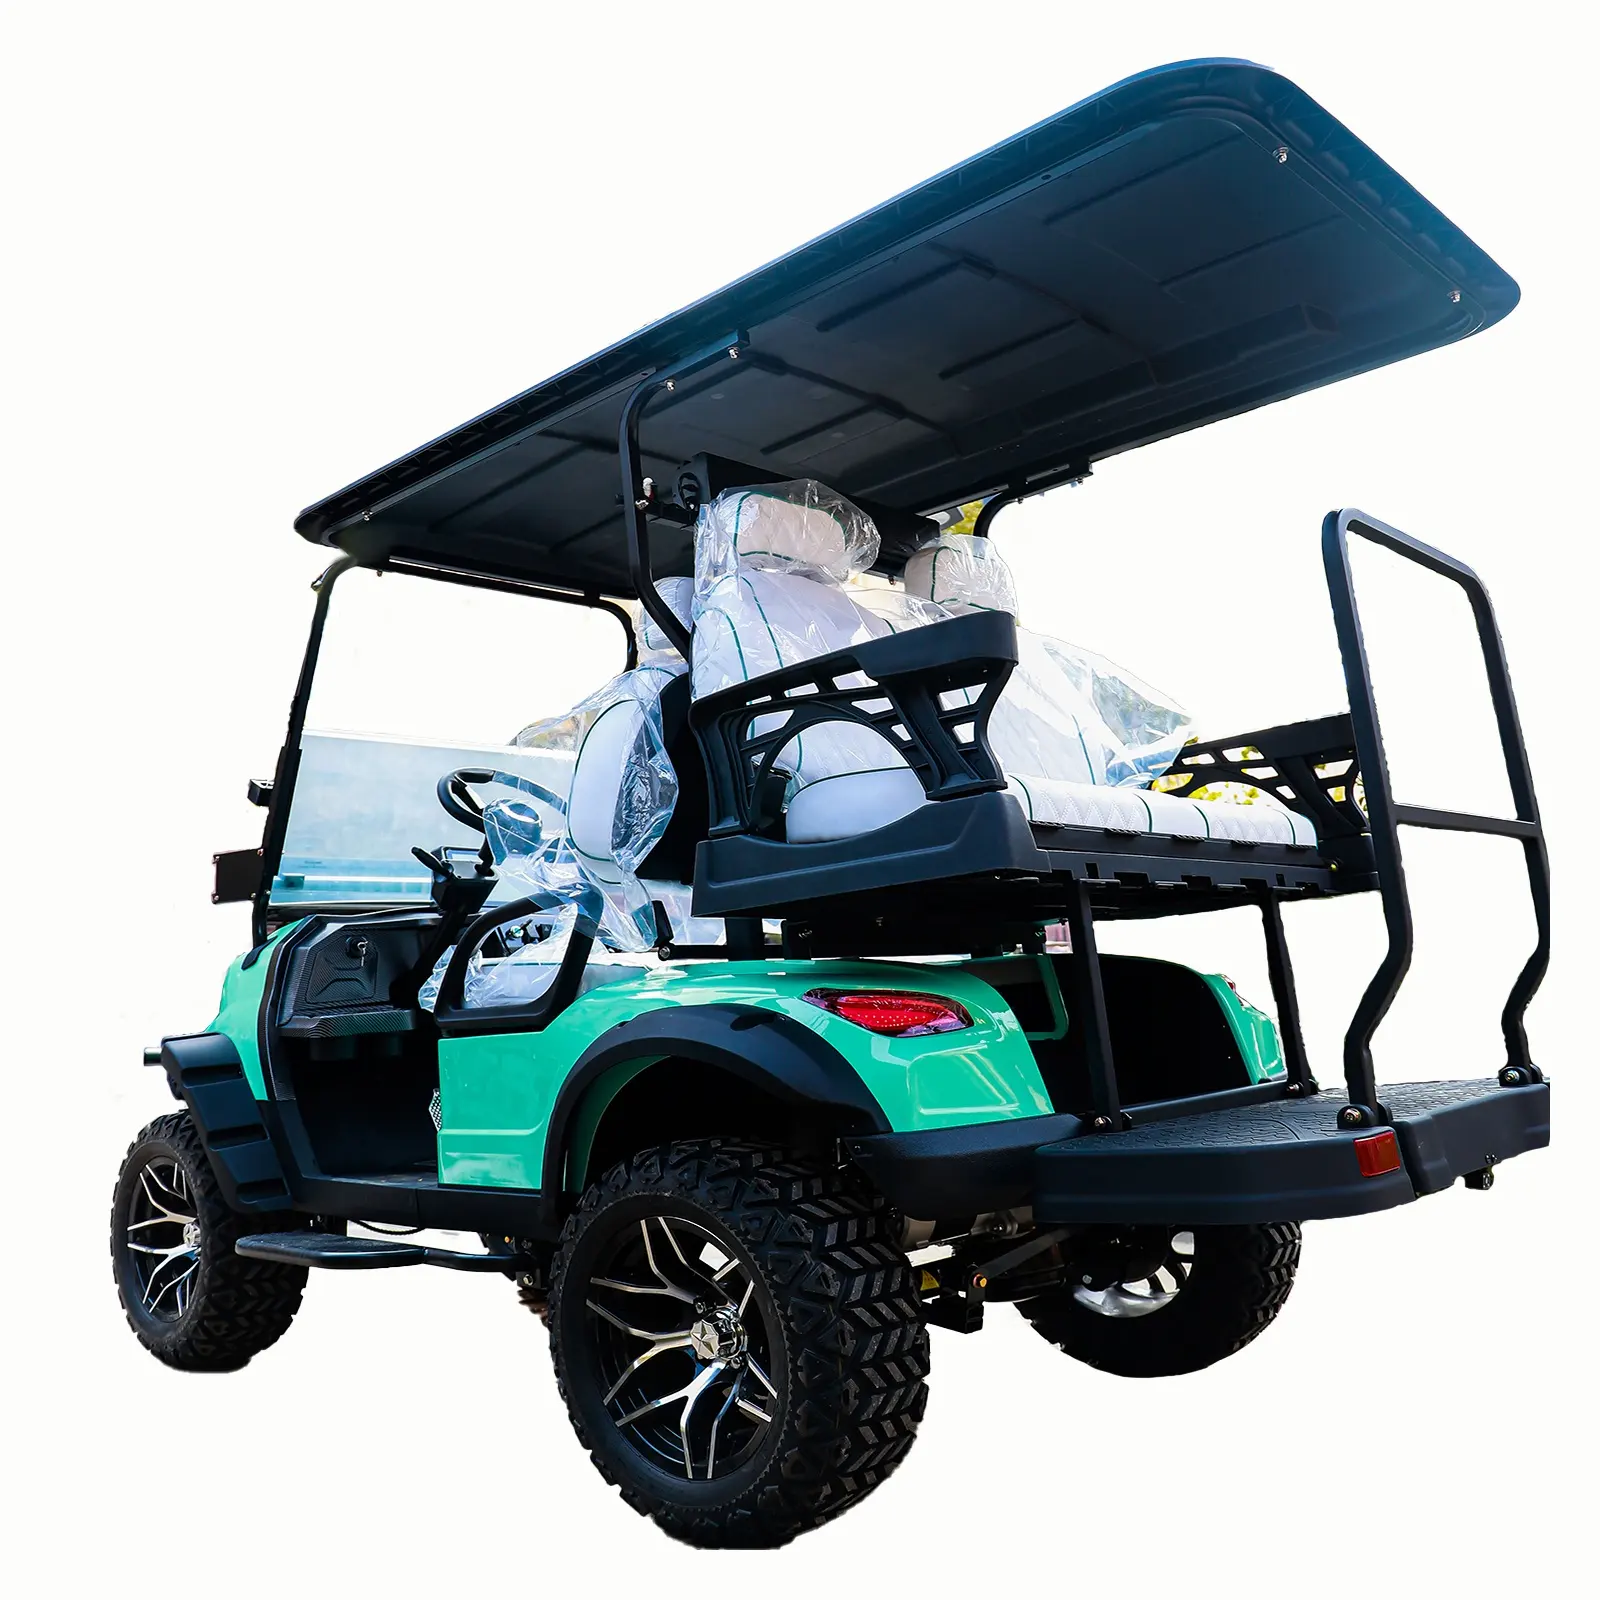 Competitive 6-Seater Off-Road Electric Golf Cart Buggy Street Legal